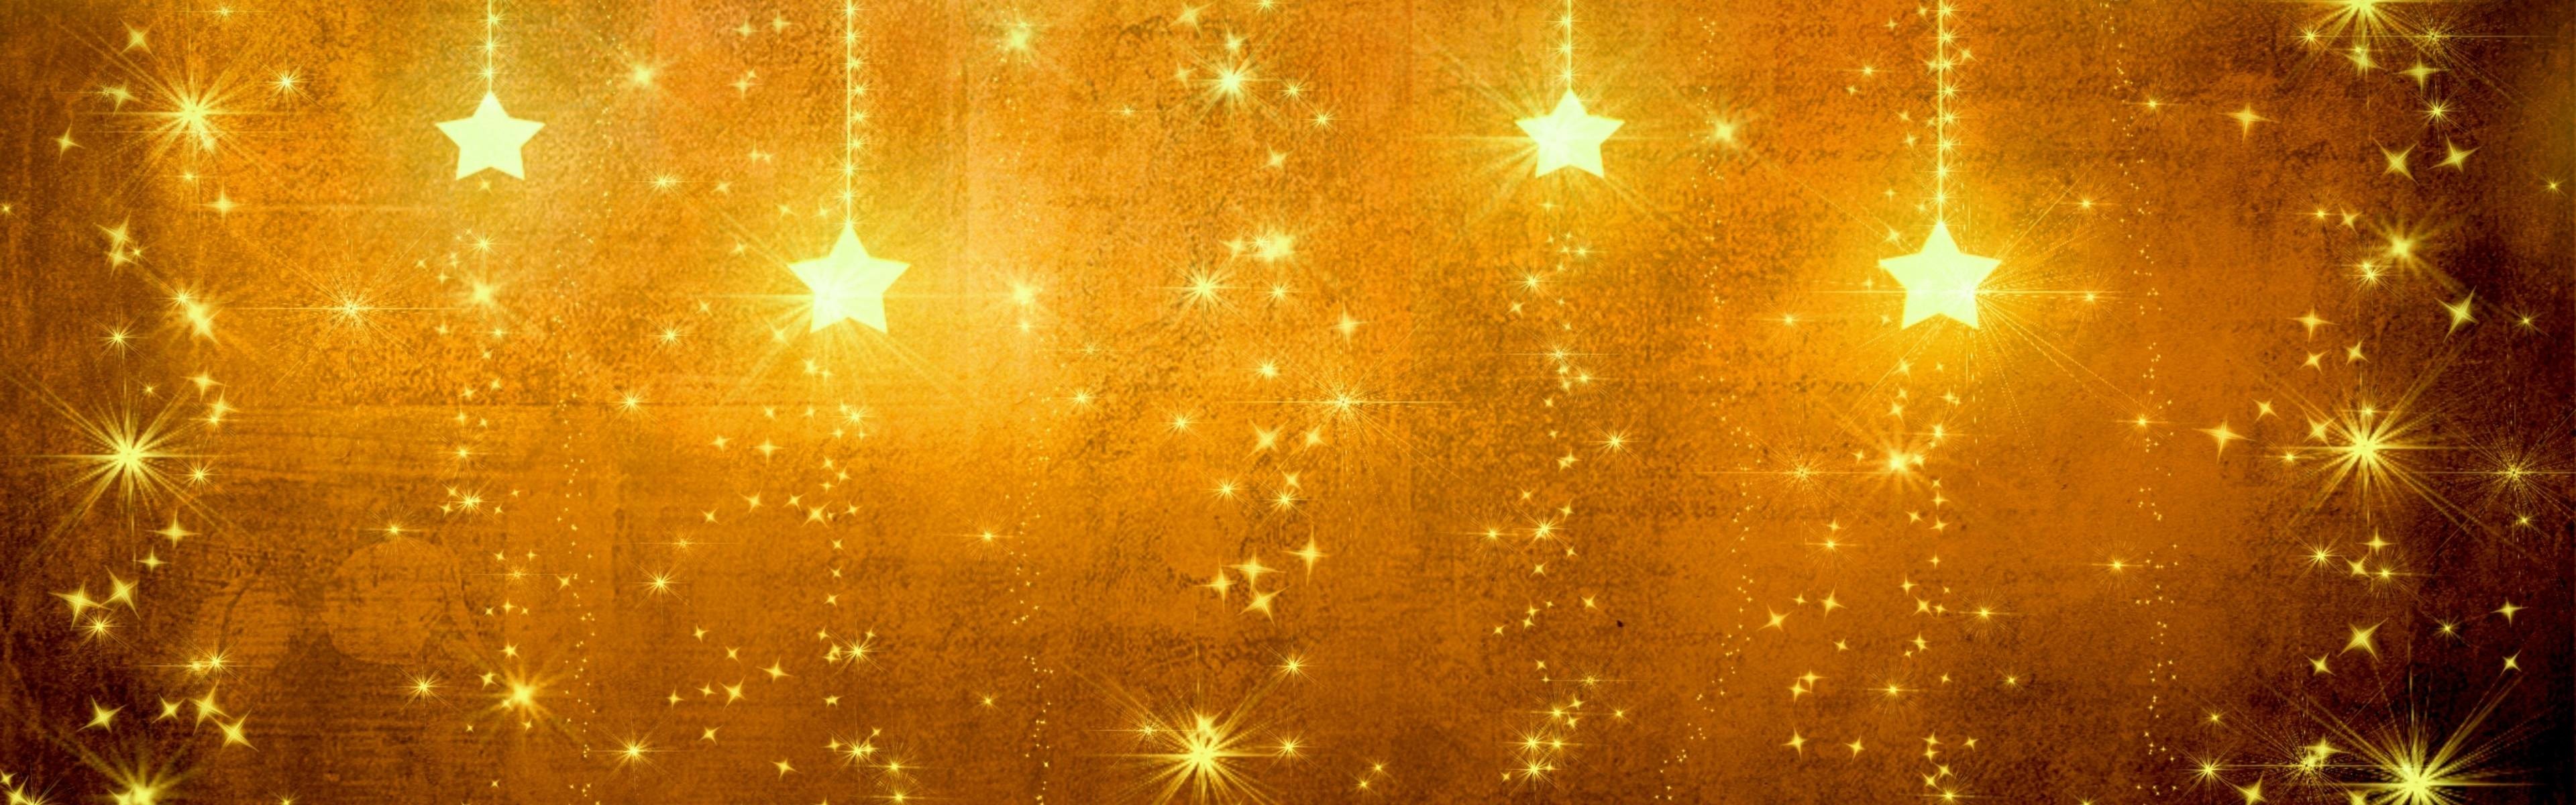 3840x1200 Download Wallpaper  star, gold, holiday, background .